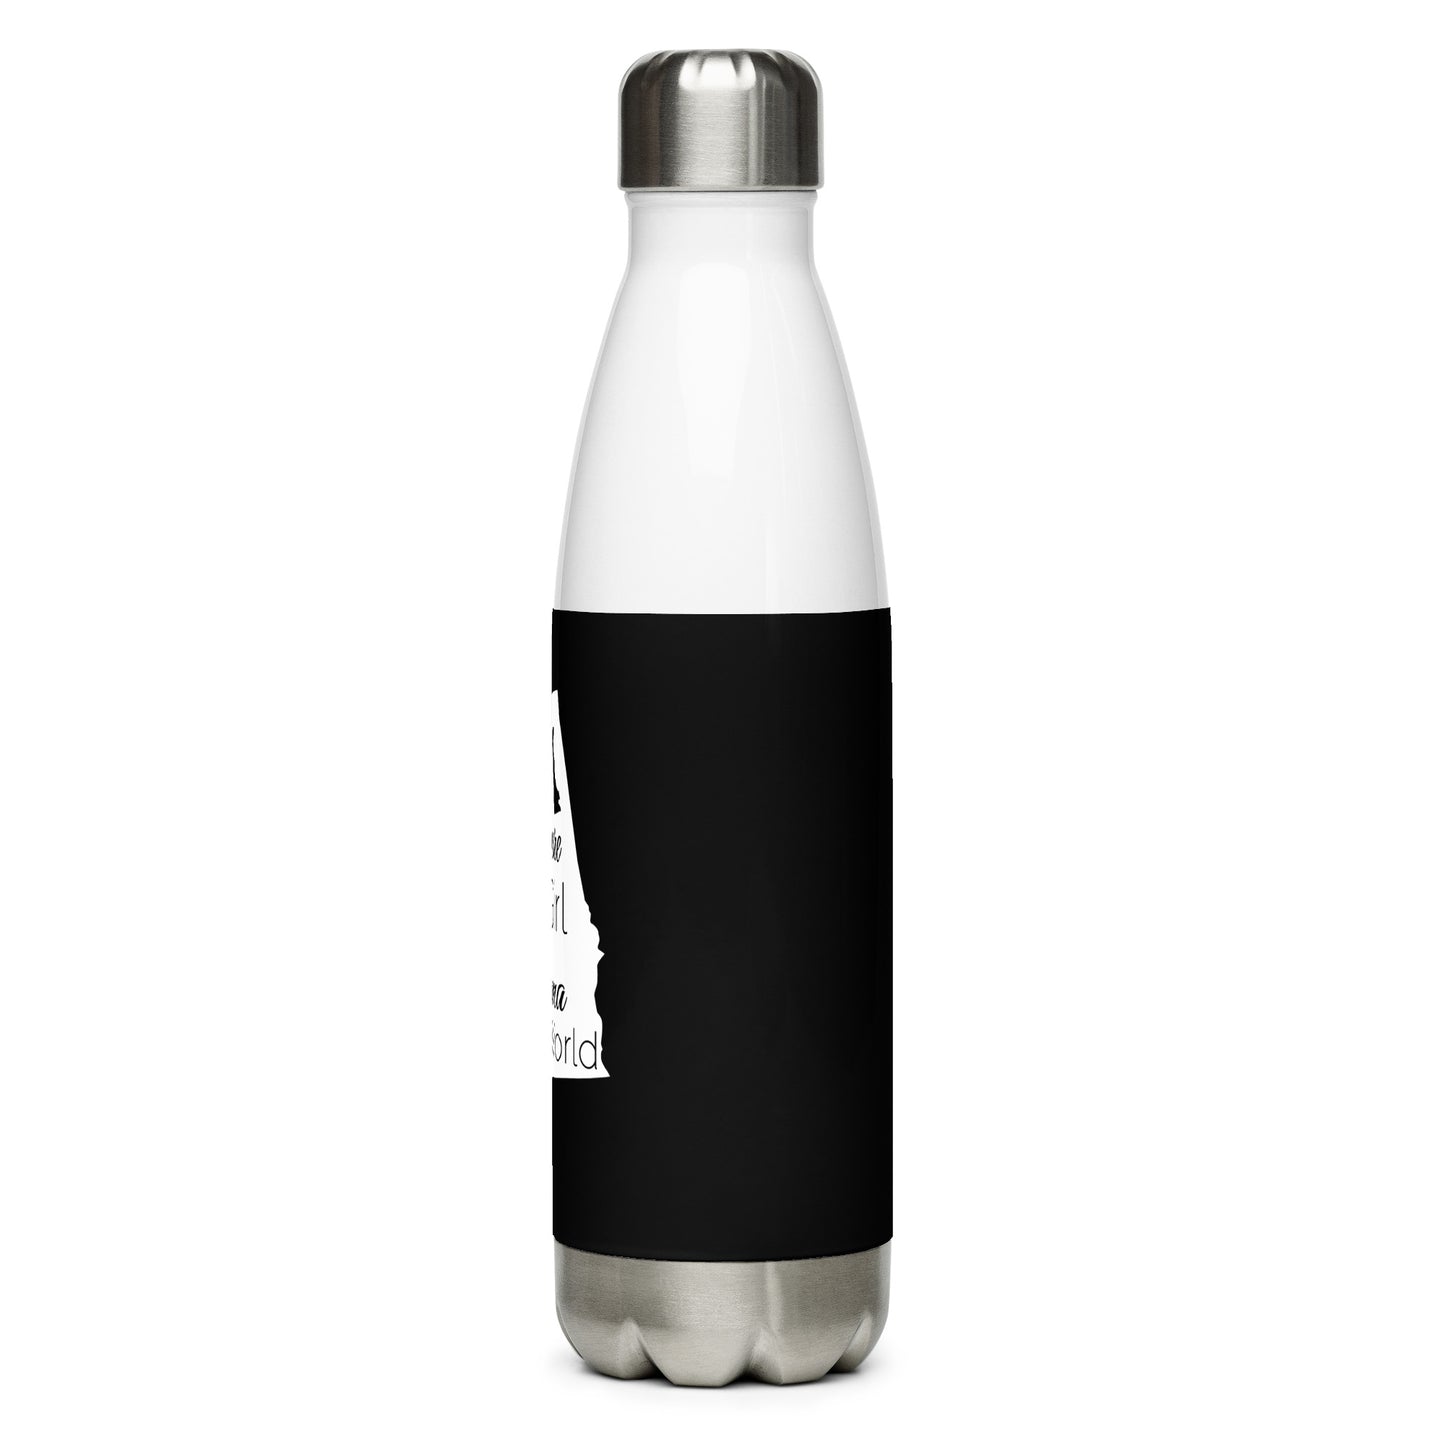 Just a Delaware Girl in an Alabama World Stainless Steel Water Bottle